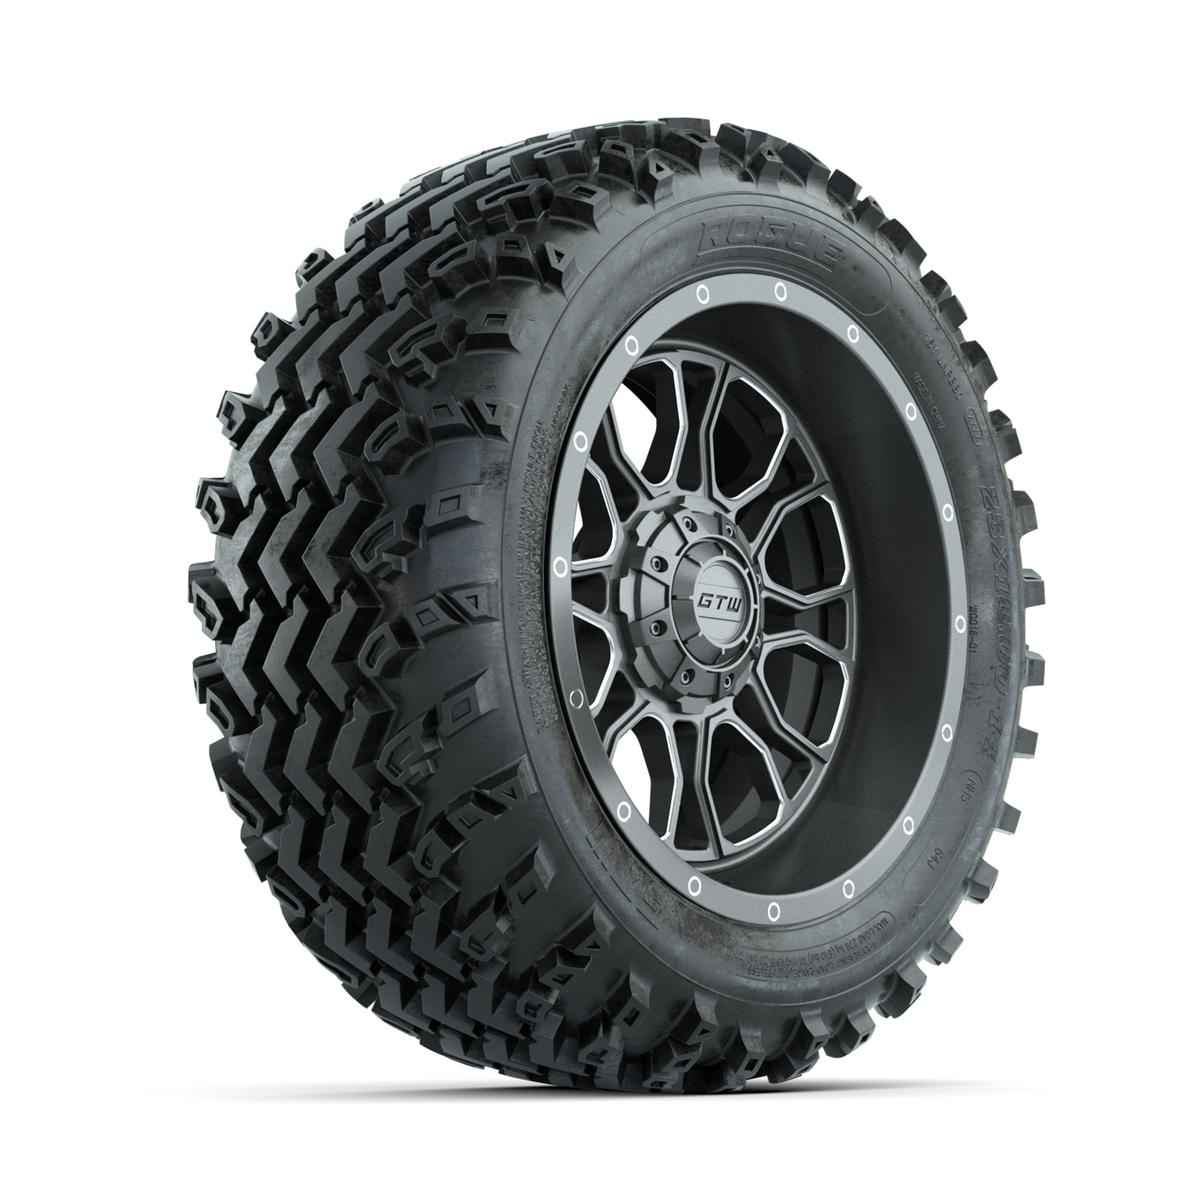 GTW Volt Gunmetal/Machined 14 in Wheels with 23x10.00-14 Rogue All Terrain Tires – Full Set